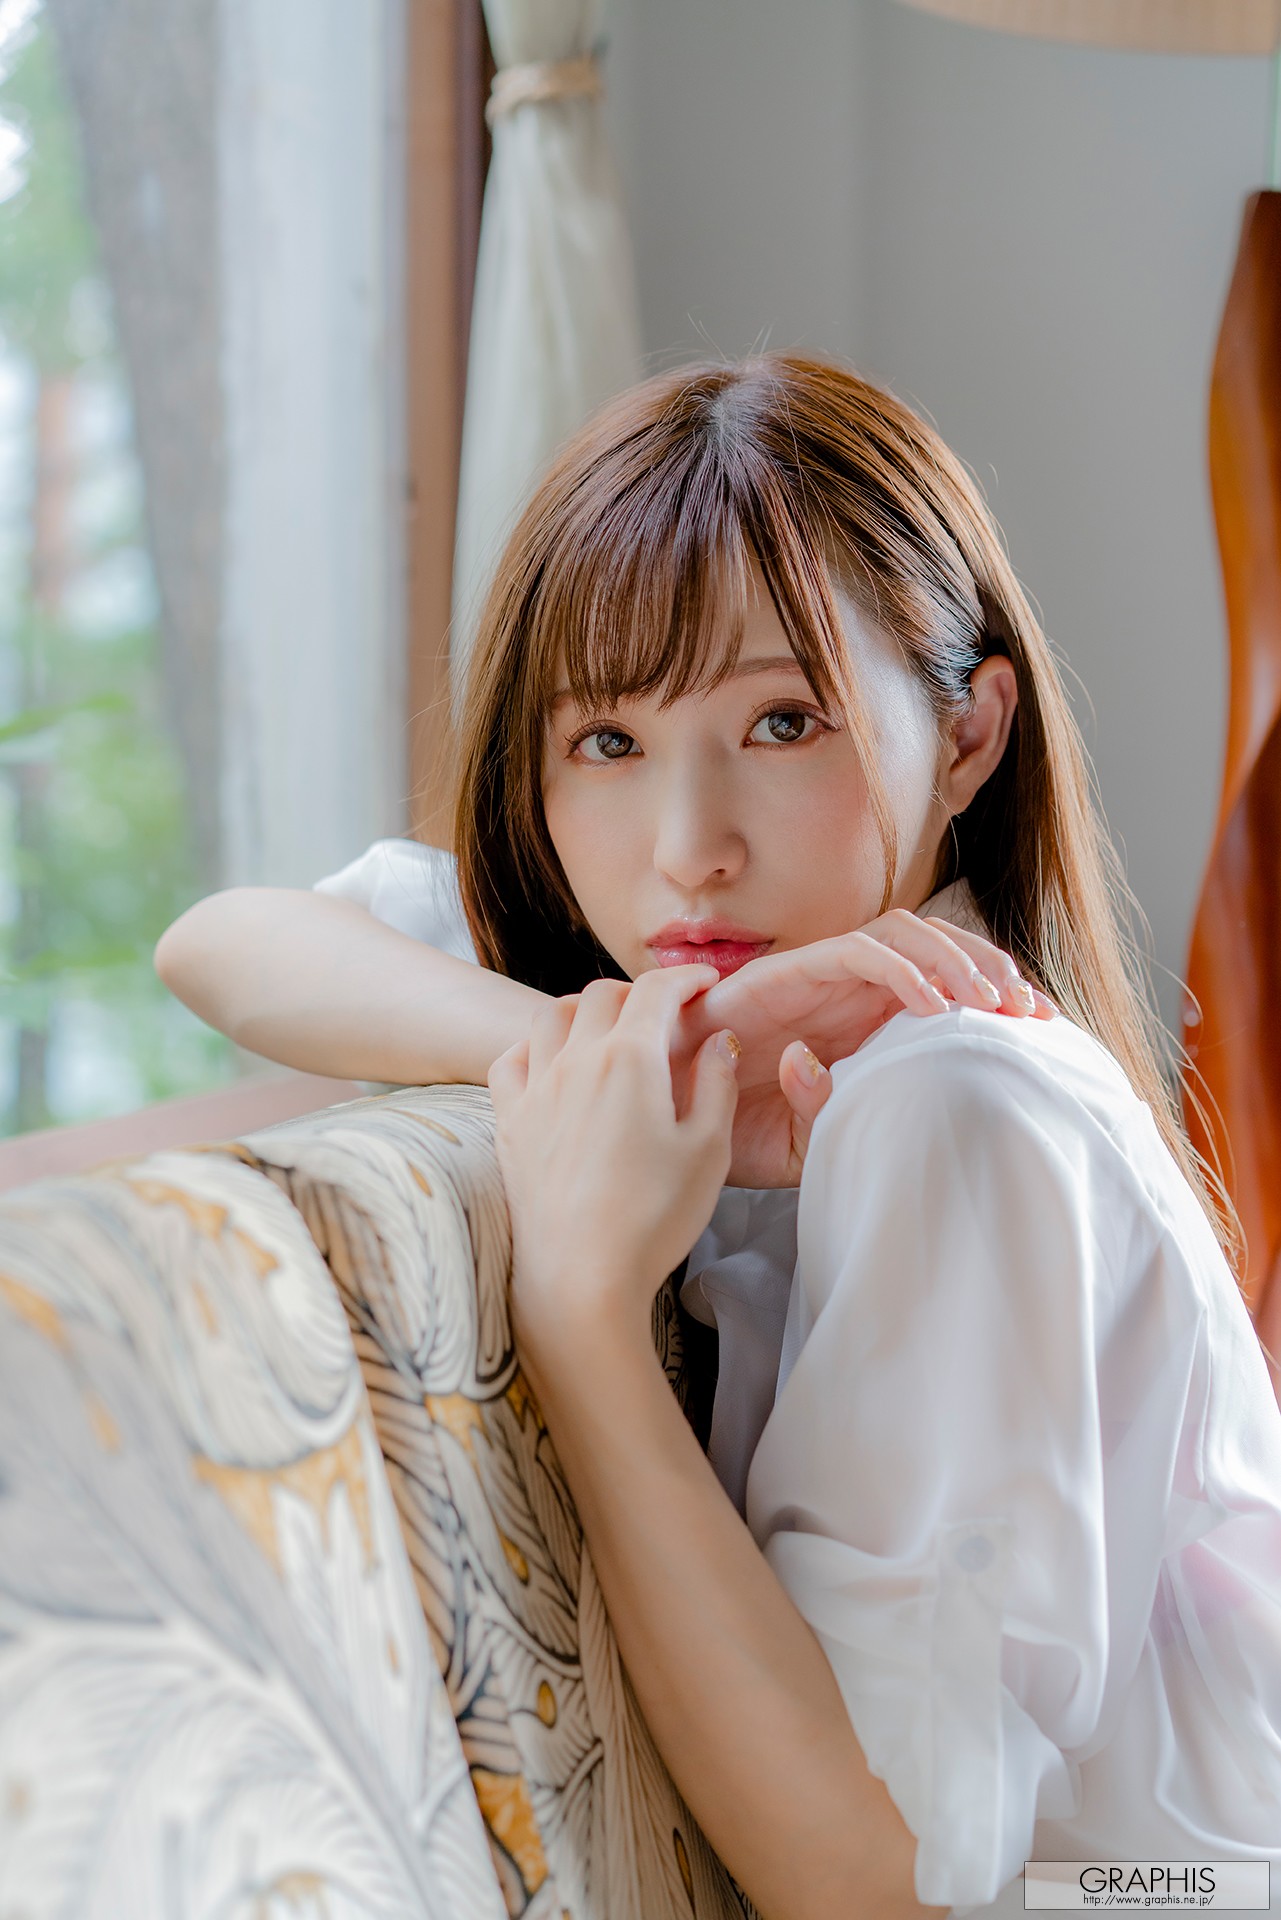 Moe Amatsuka 天使もえ [graphis] Gals 「honey」 Vol 01 Share Erotic Asian Girl Picture And Livestream